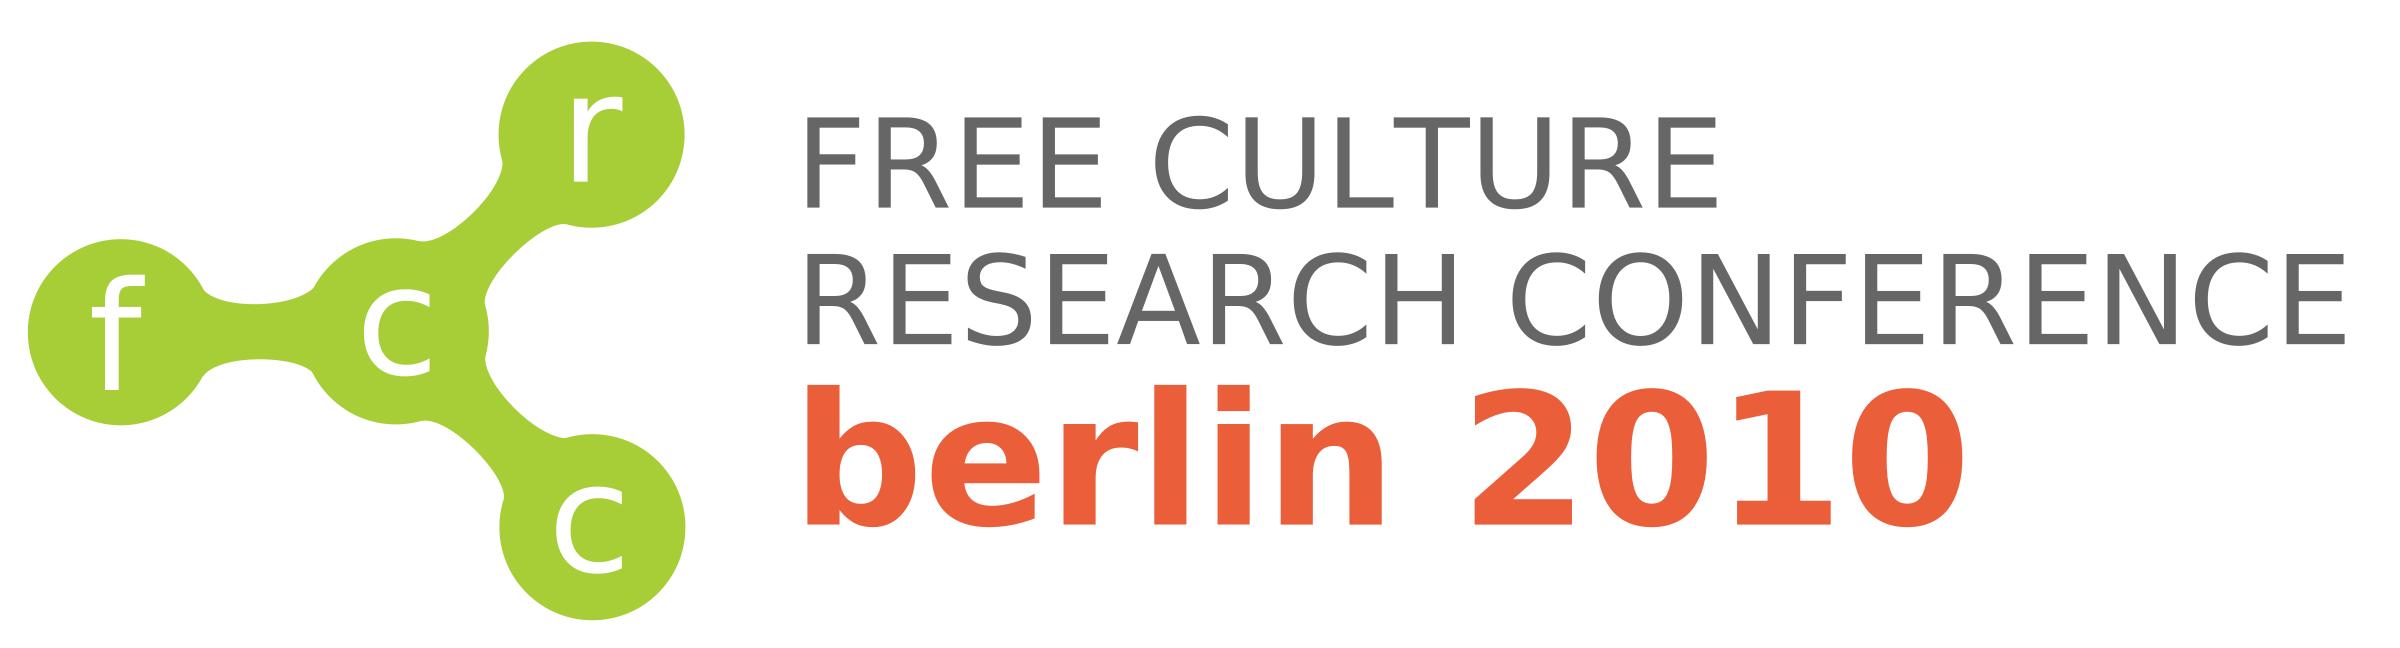 Free Culture Research Conference Logo 4.1 icons